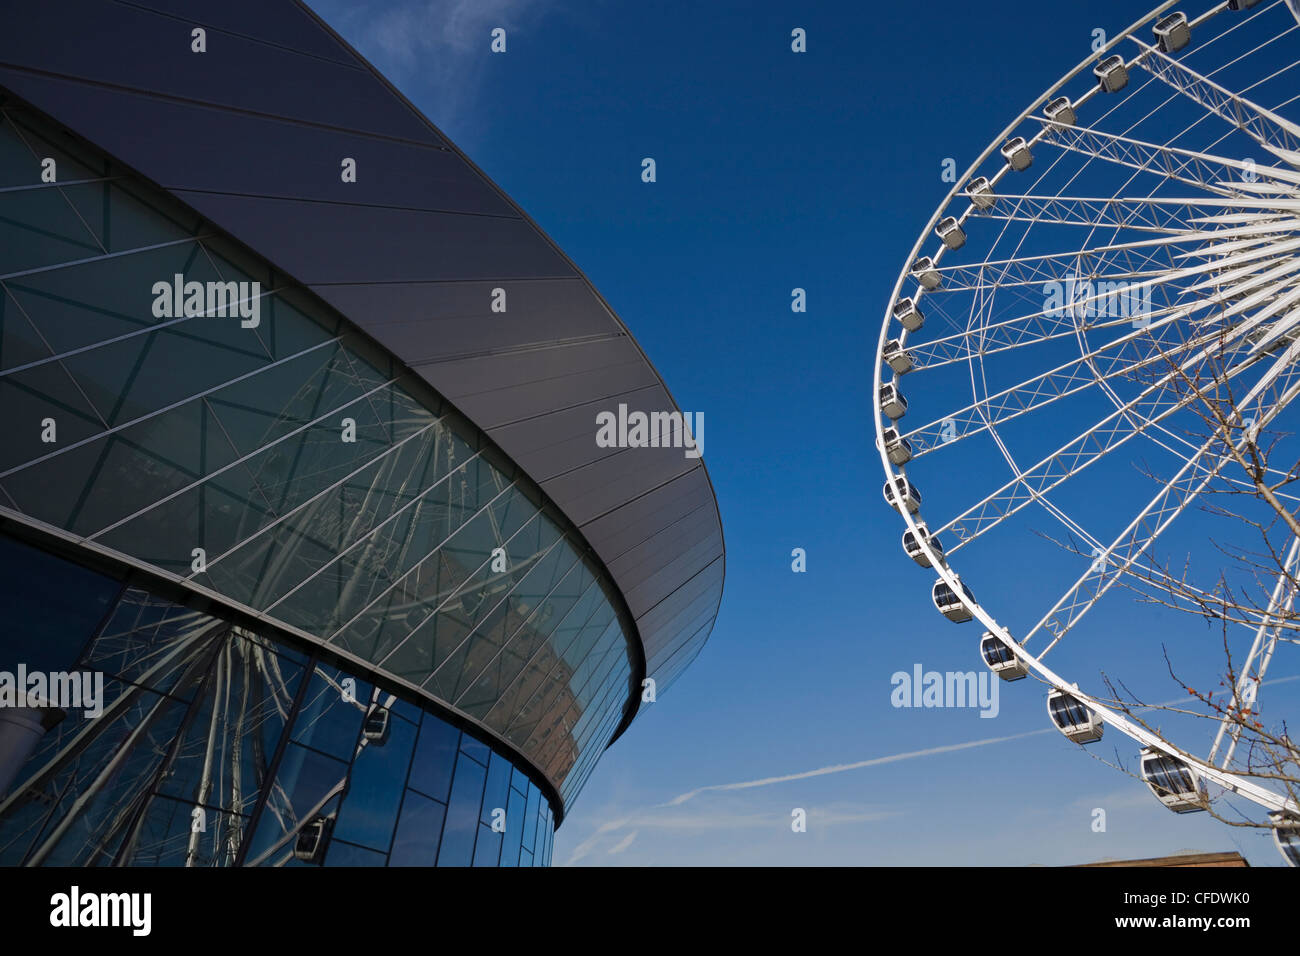 The Big Wheel outside the Echo Arena and Convention Centre, Liverpool, Merseyside, England, United Kingdom, Europe Stock Photo